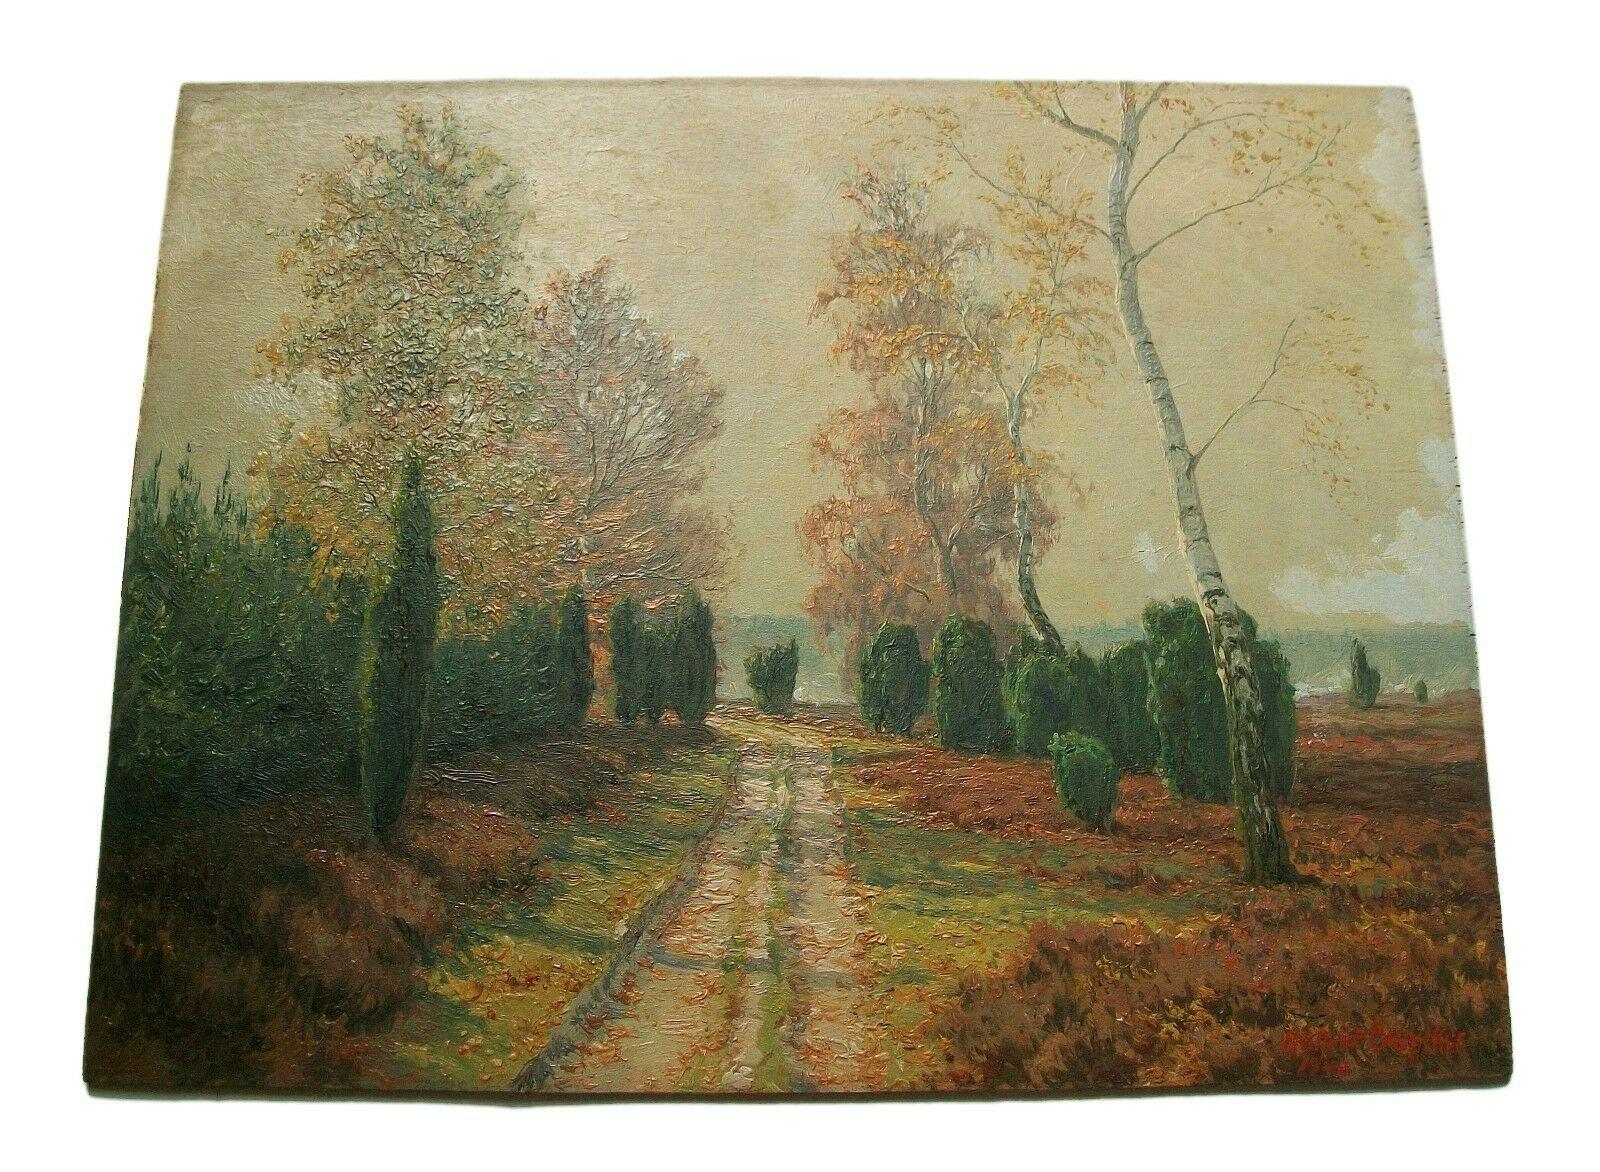 Hand-Painted Richard De Bruycker, 'Autumn Morning', Oil Painting on Panel, Germany, 1948 For Sale